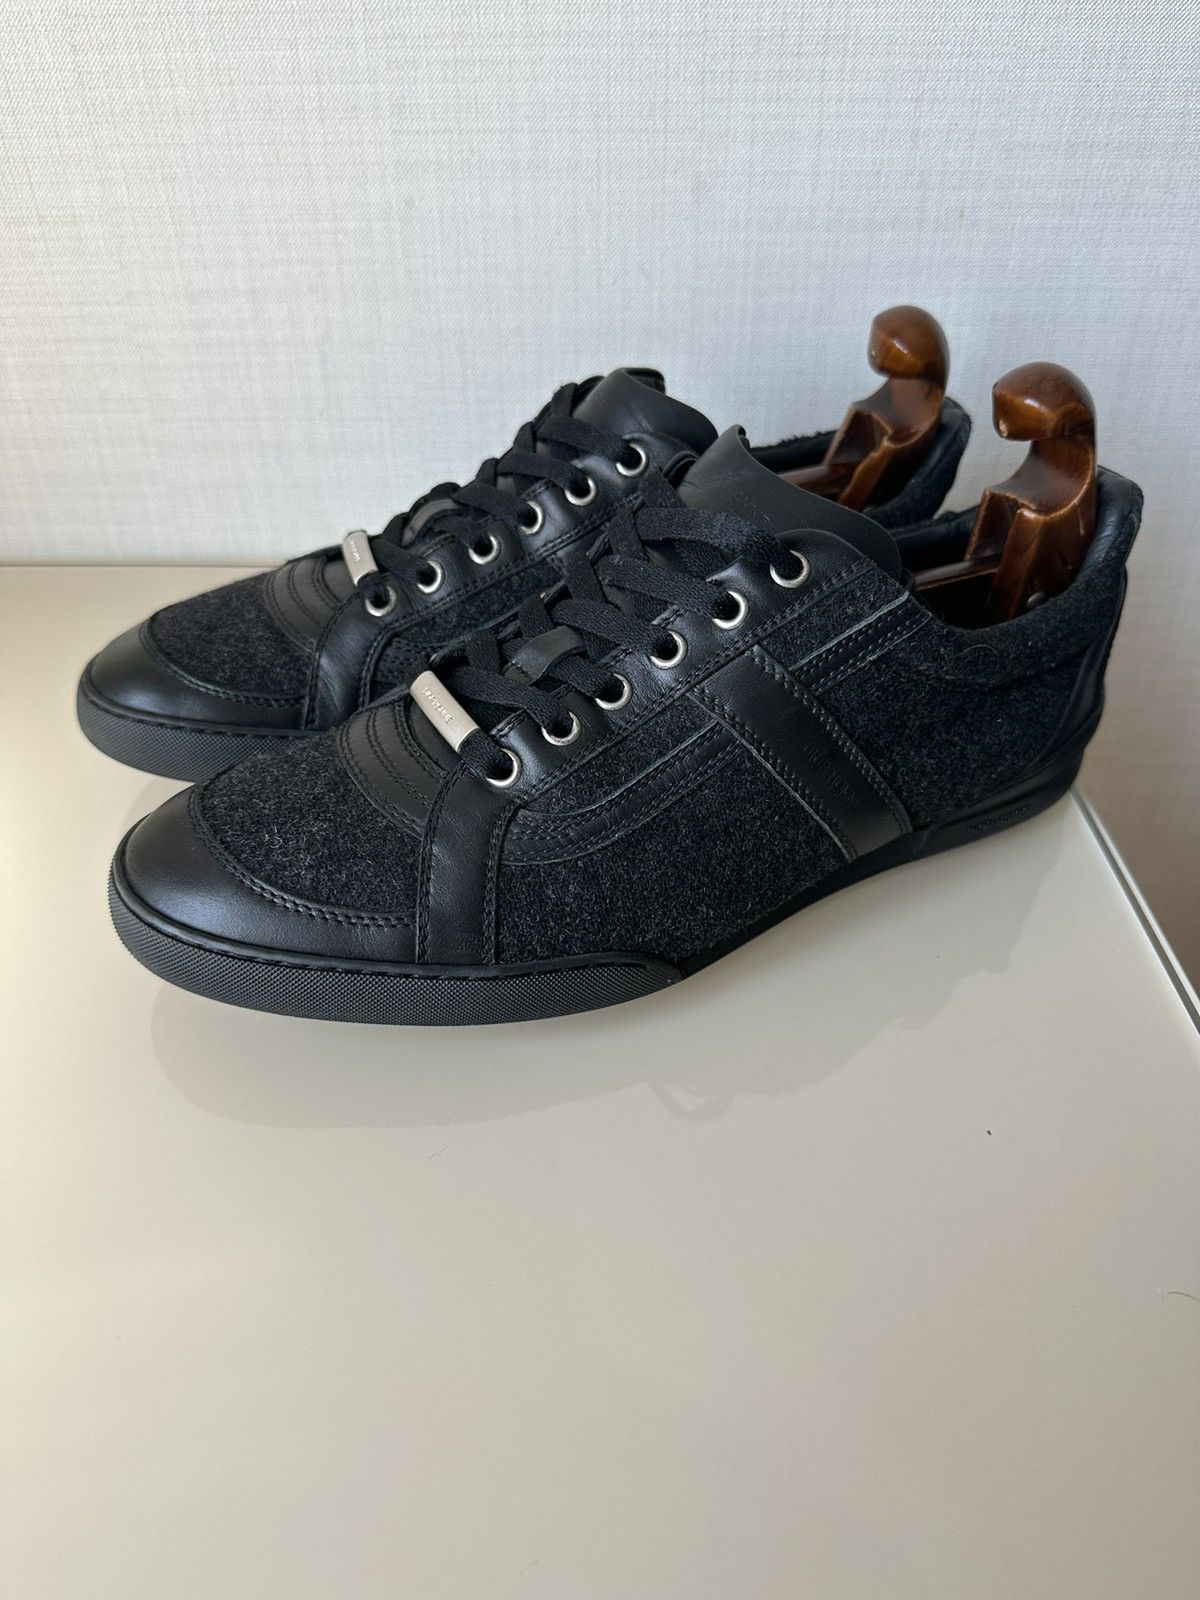 Dior Dior Homme x Hedi Slimane low top sneakers 41-42 | Grailed